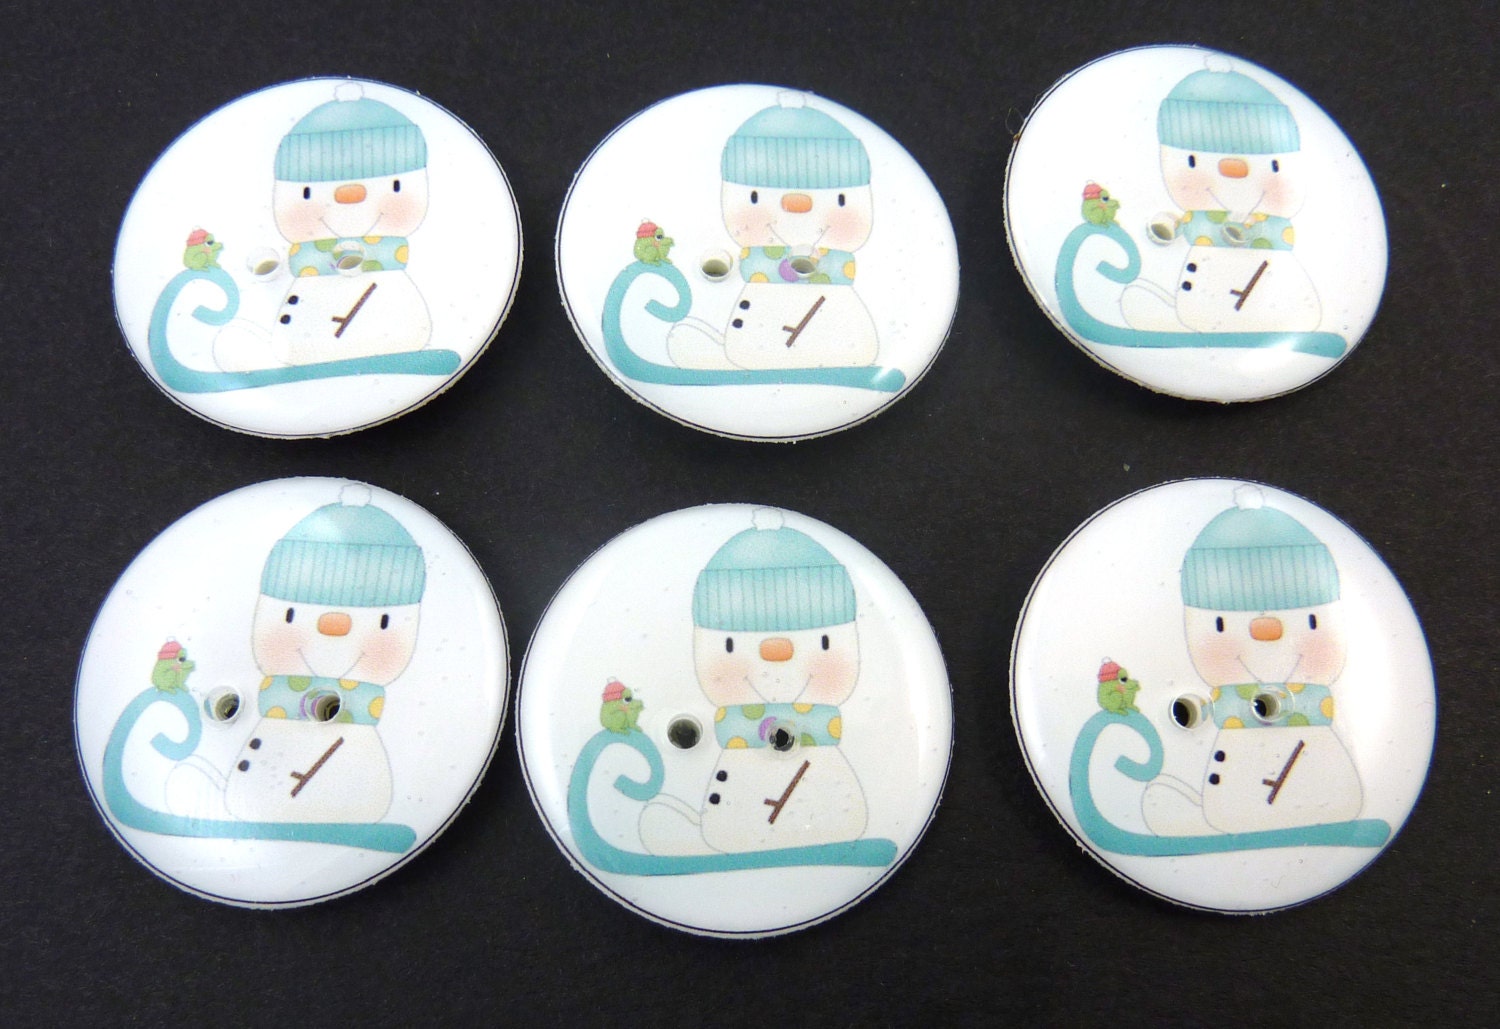 6 LARGE Snowman Buttons. Handmade Buttons. 1 or 25 mm.